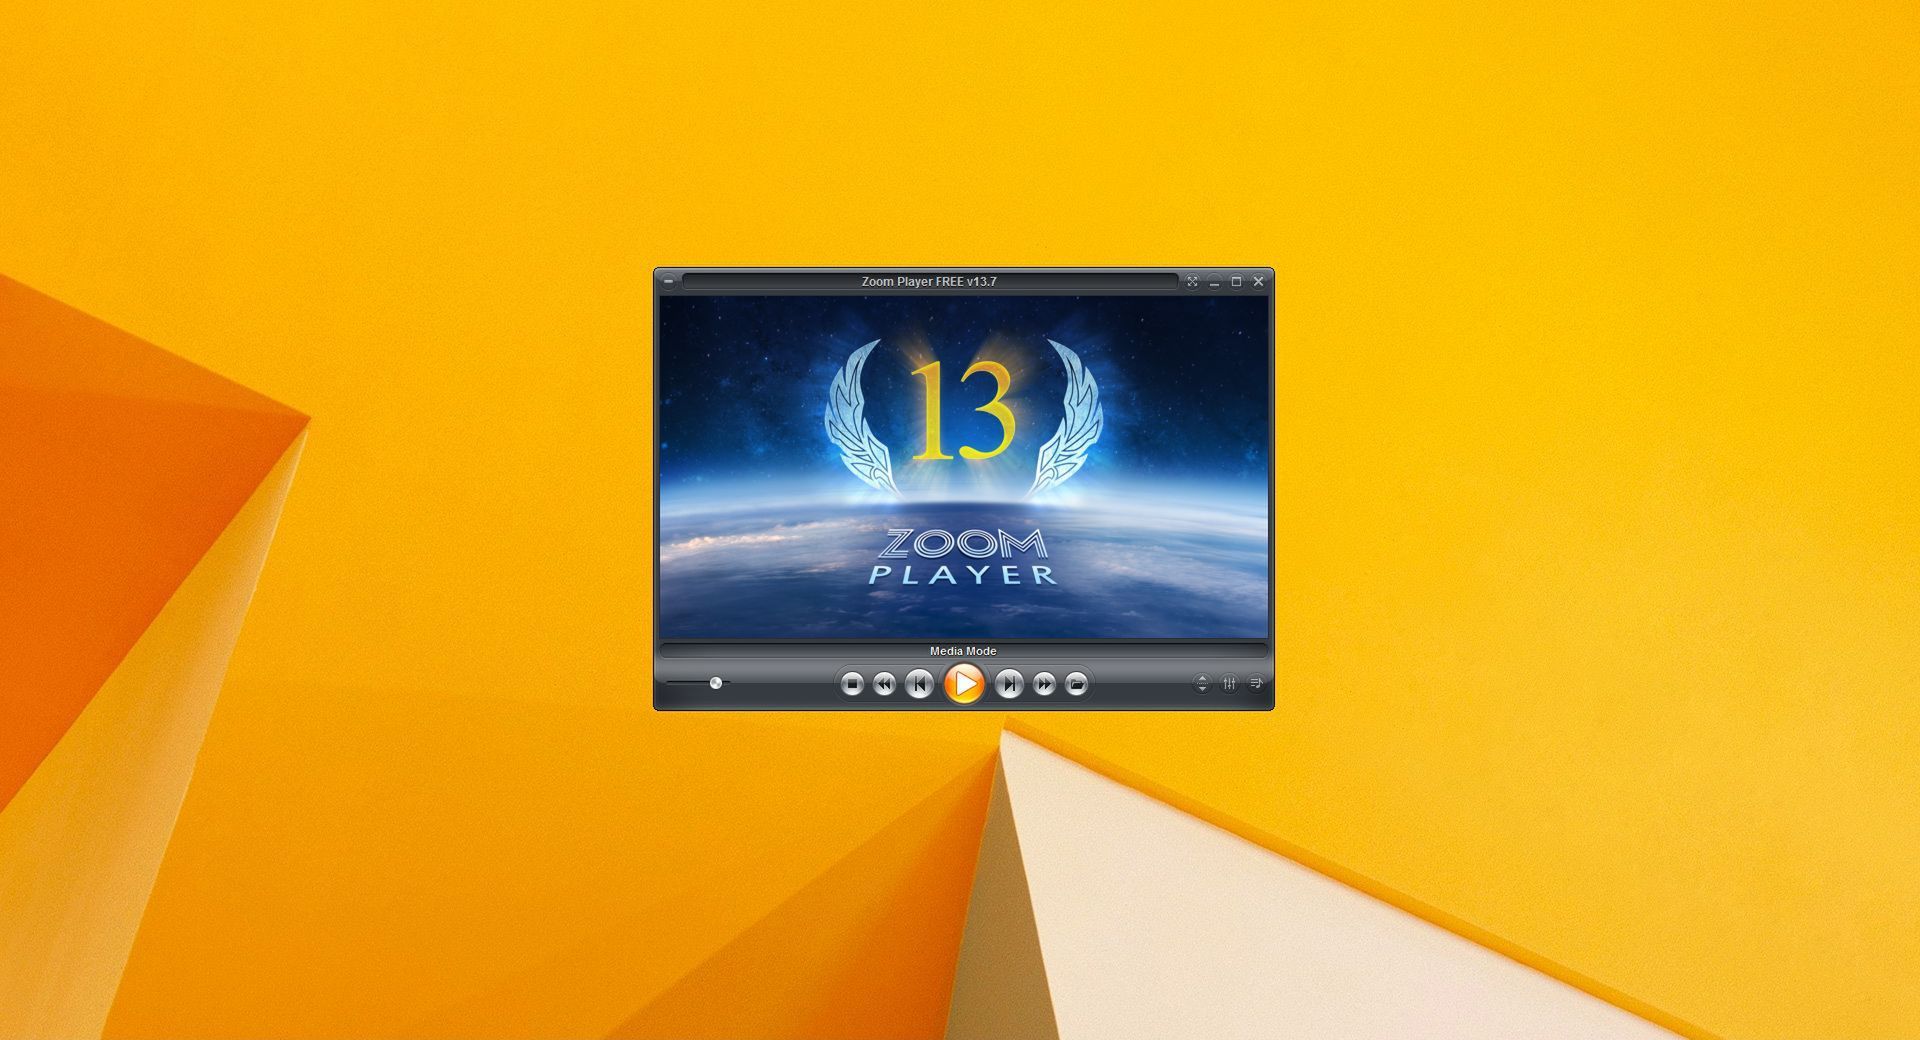 Zoom Player MAX 17.2.0.1720 download the new